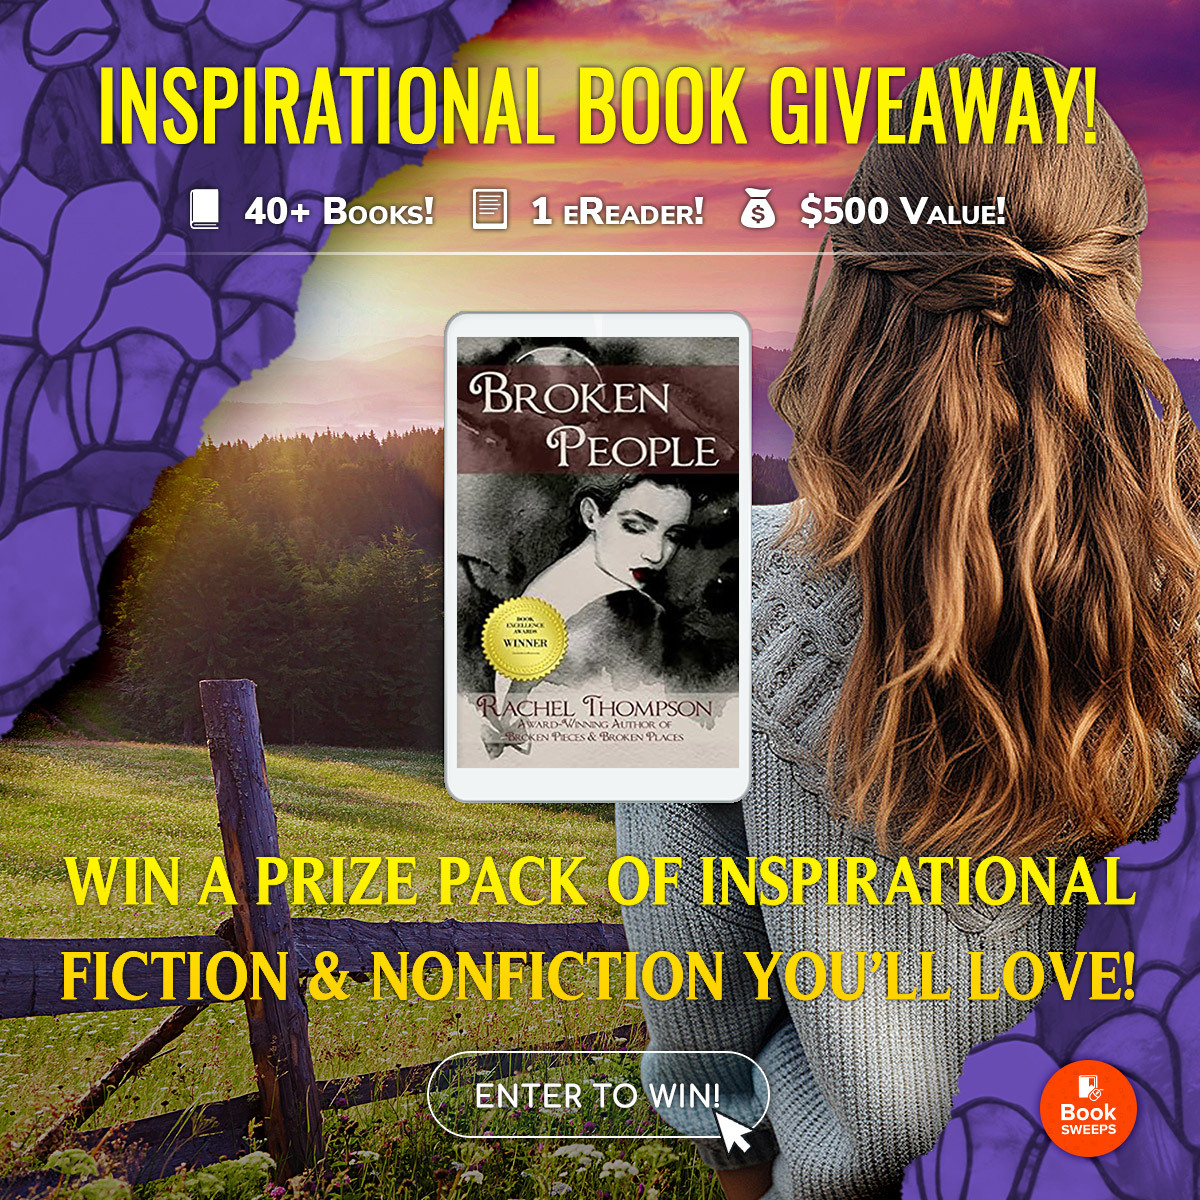 Enter for a chance to win #Inspirational #Fiction and #Nonfiction books from your favorite bestselling and award-winning authors,  including BROKEN PEOPLE  by @RachelintheOC, via @BookSweeps, plus a brand-new Kindle Fire! bit.ly/inspirational-…

 #Free #EnterNow #eBooks #Kindle